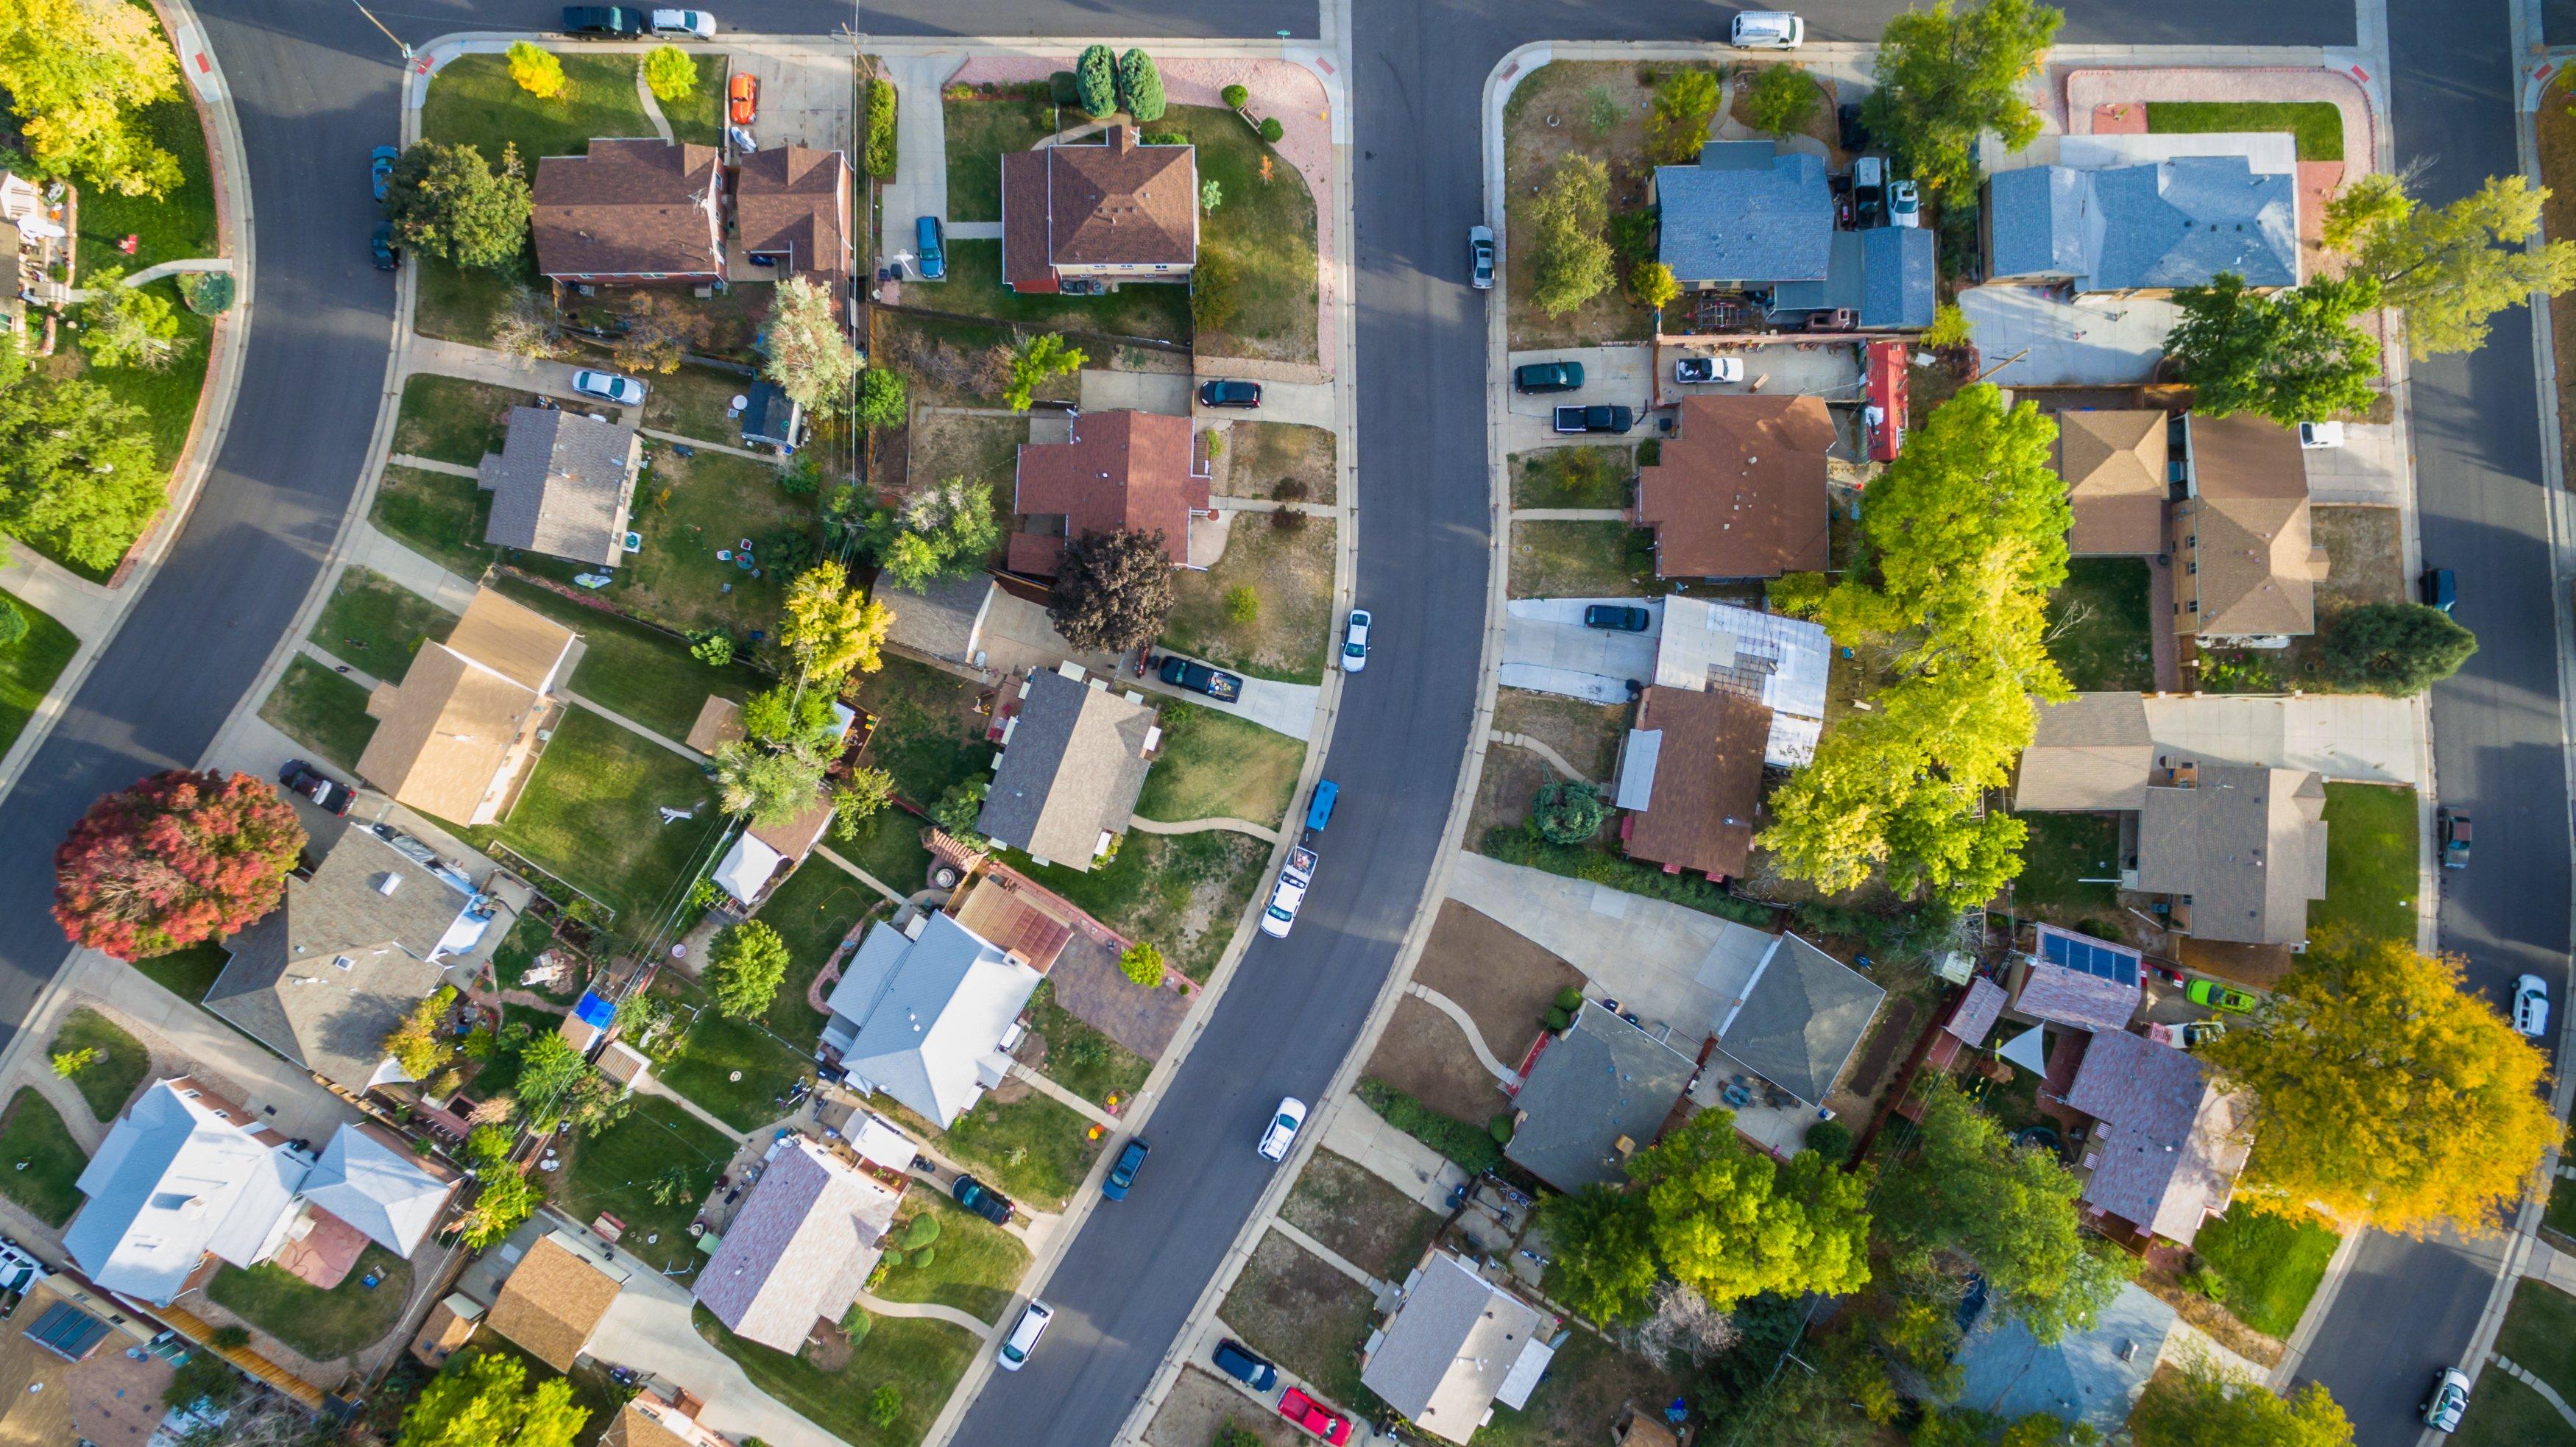 View from above of a suburban neighborhood.